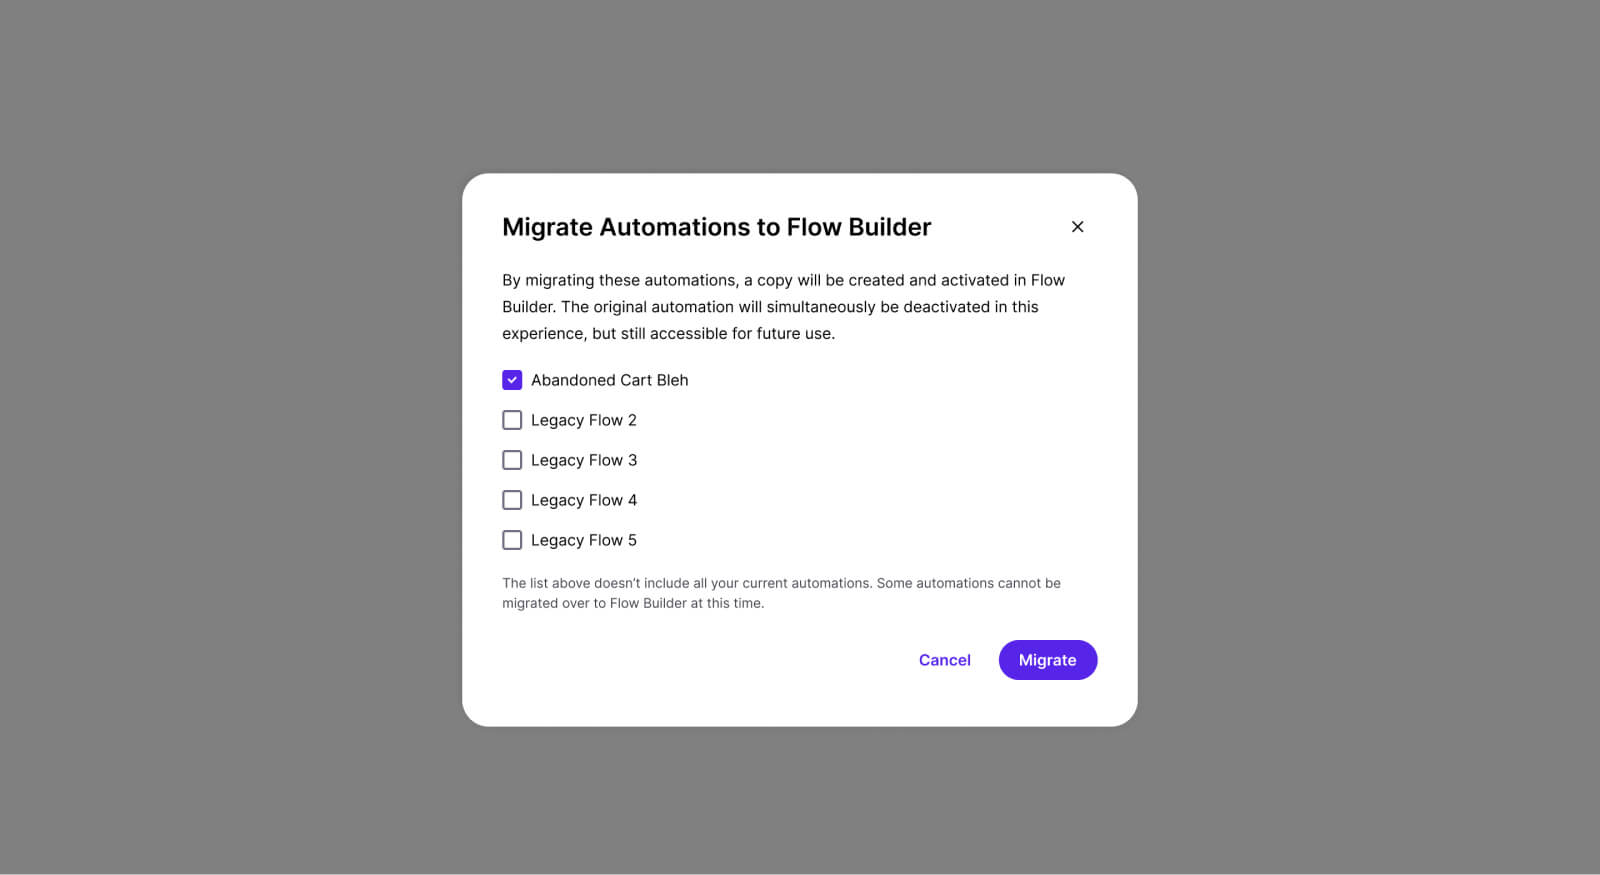 Adding a way to convert legacy automations into automation flows